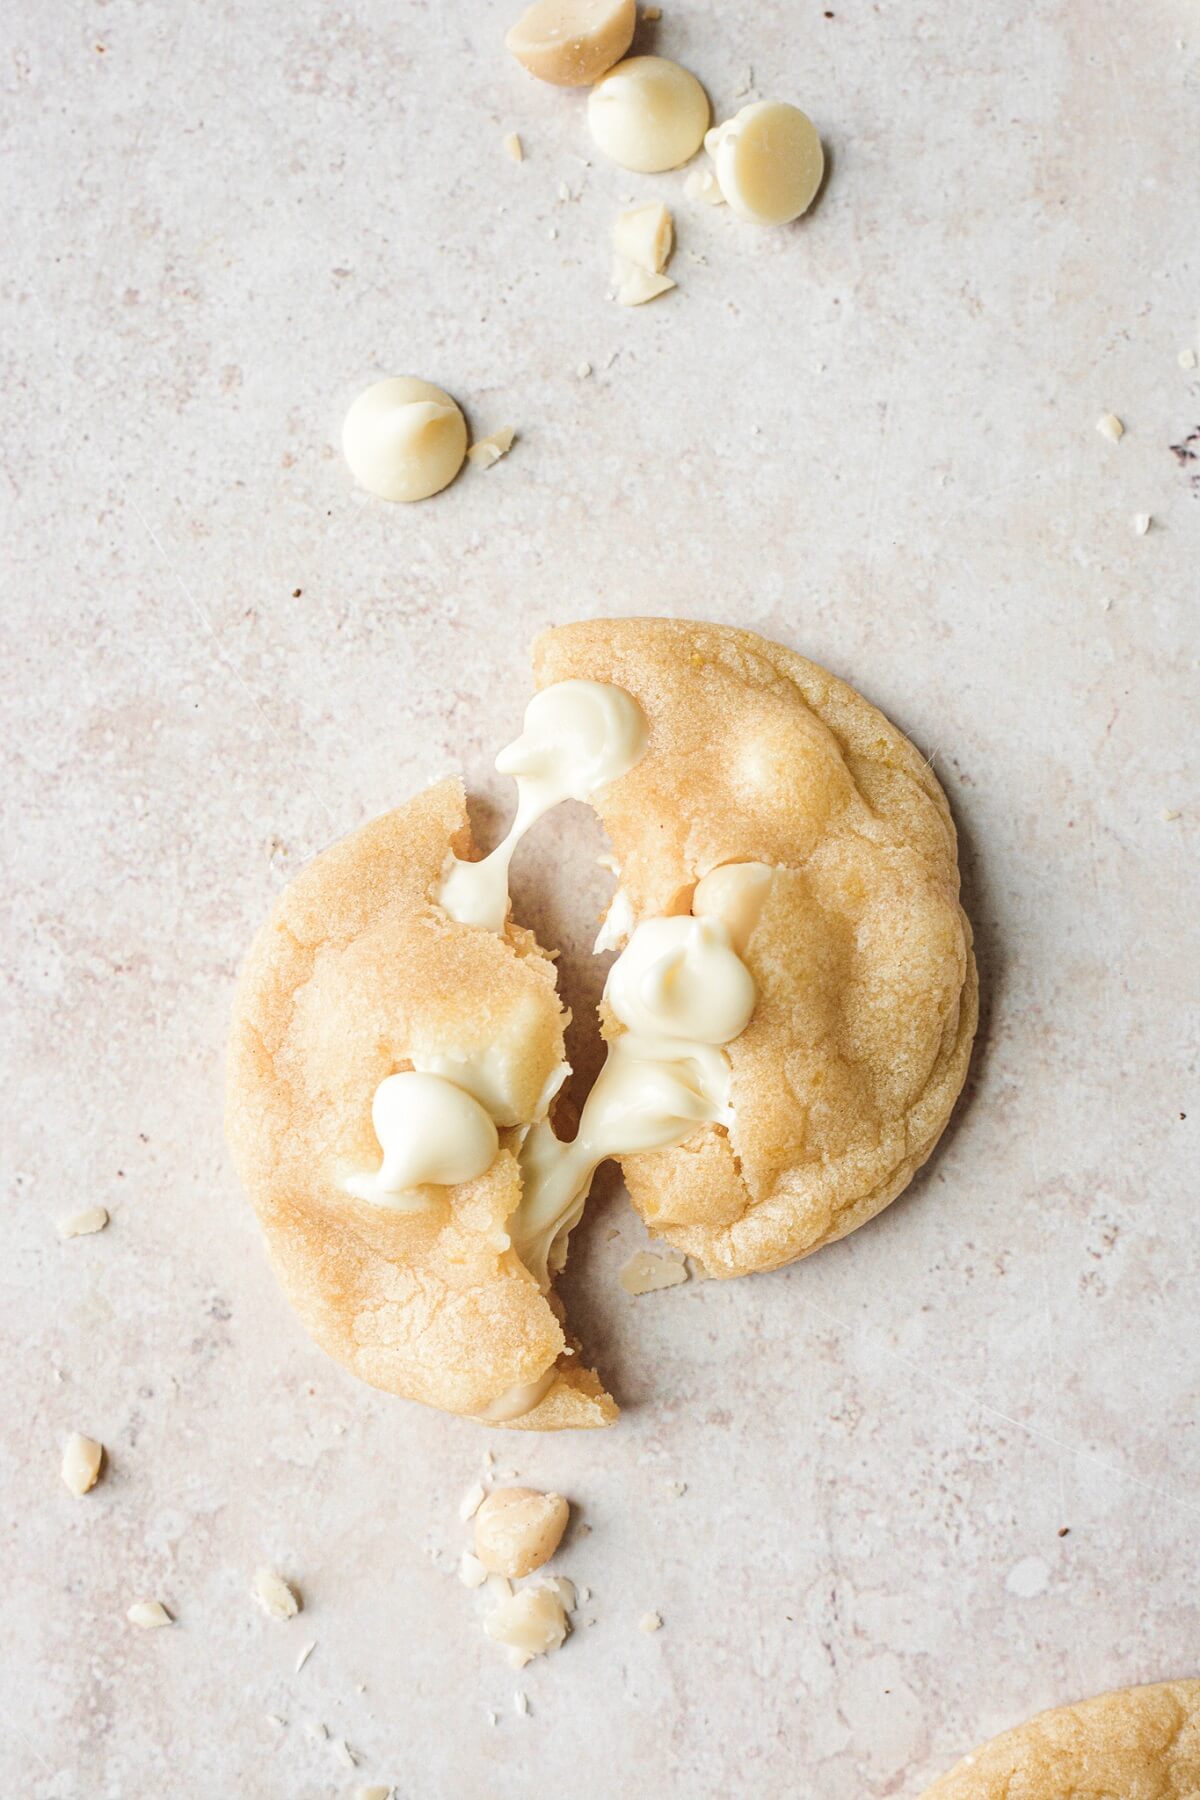 A soft lemon cookie with white chocolate chips broken in half.